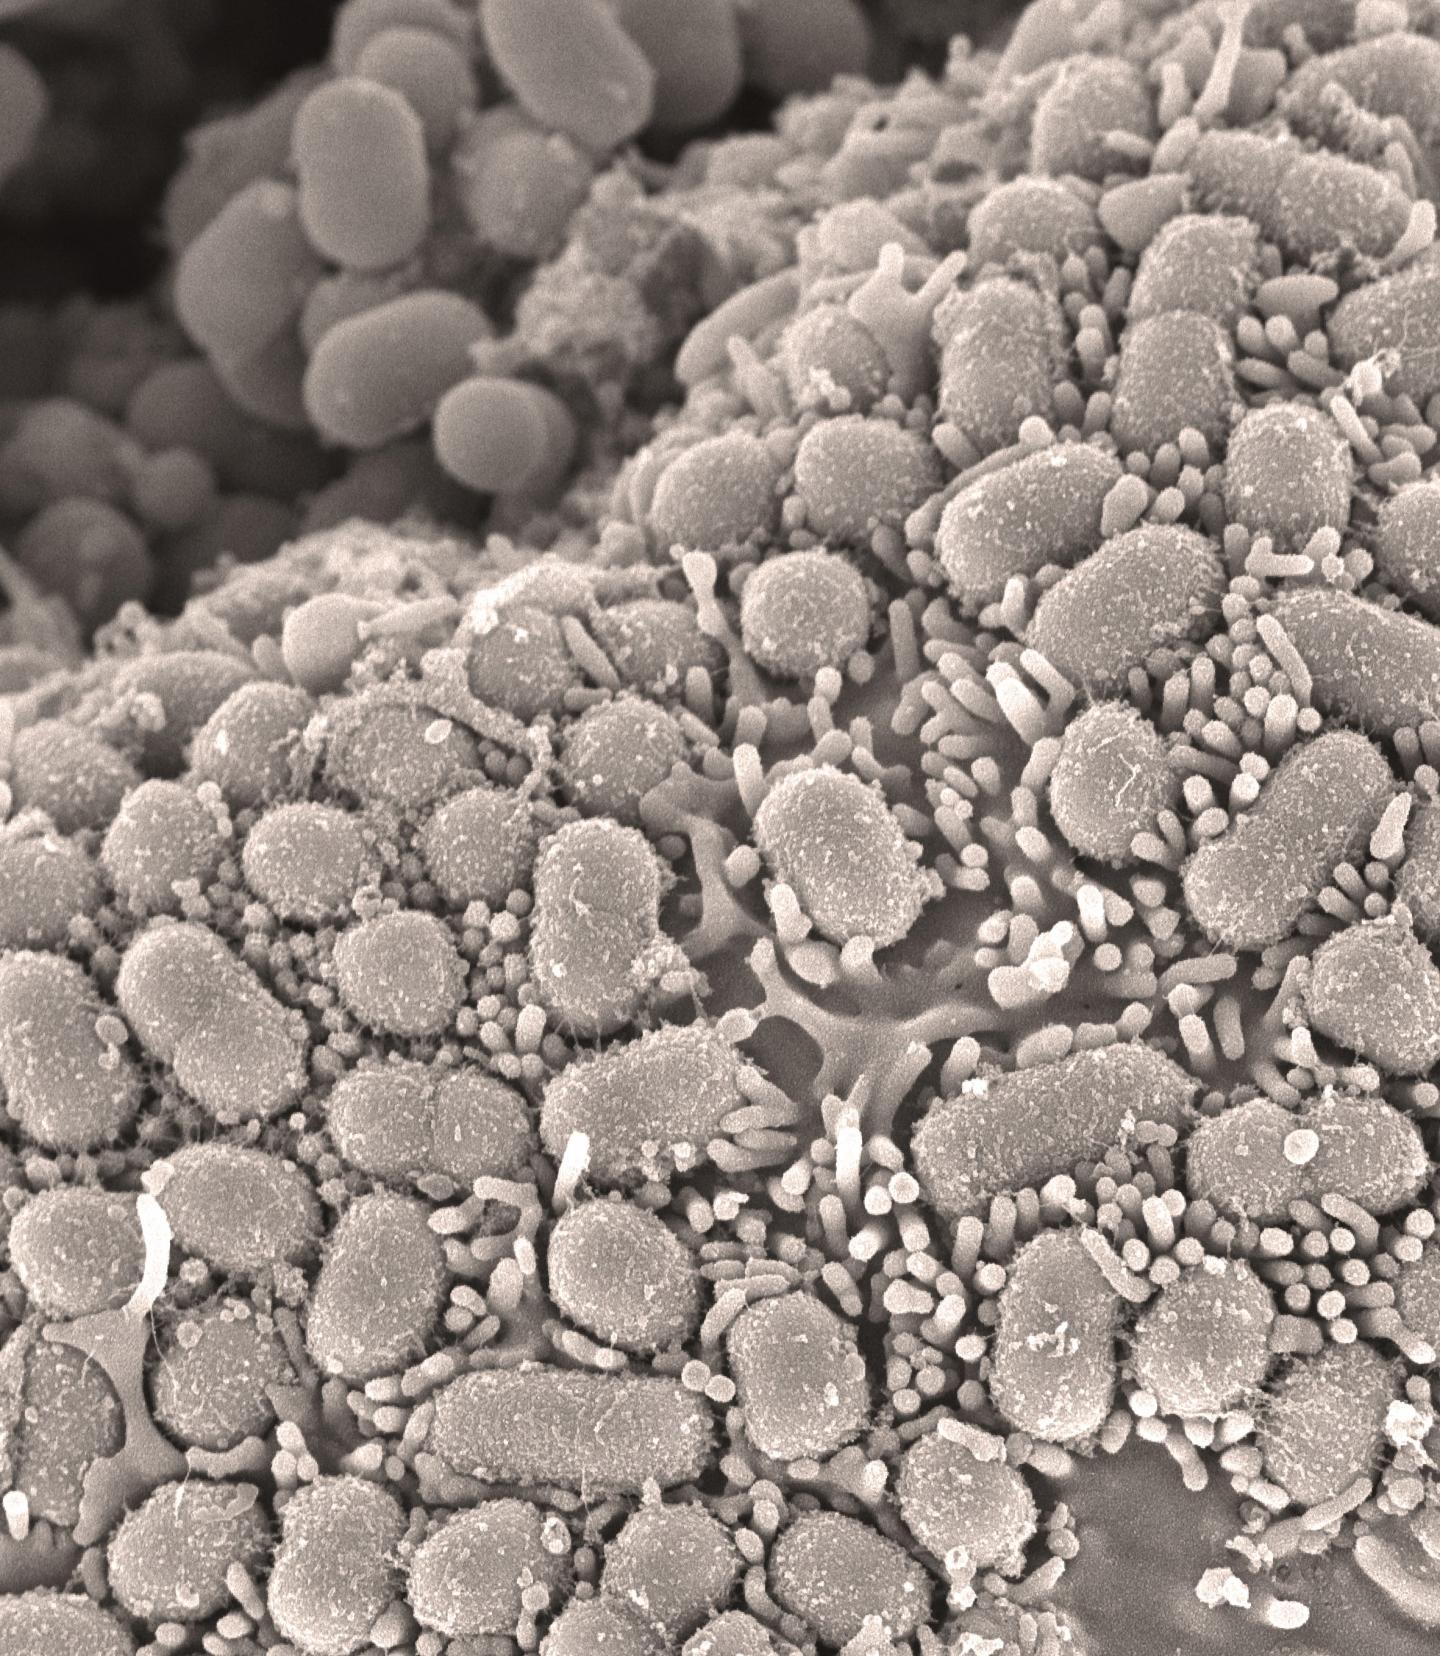 Scanning Electron Micrograph of Mouse Intestine Infected with Staphylococcus Aureus